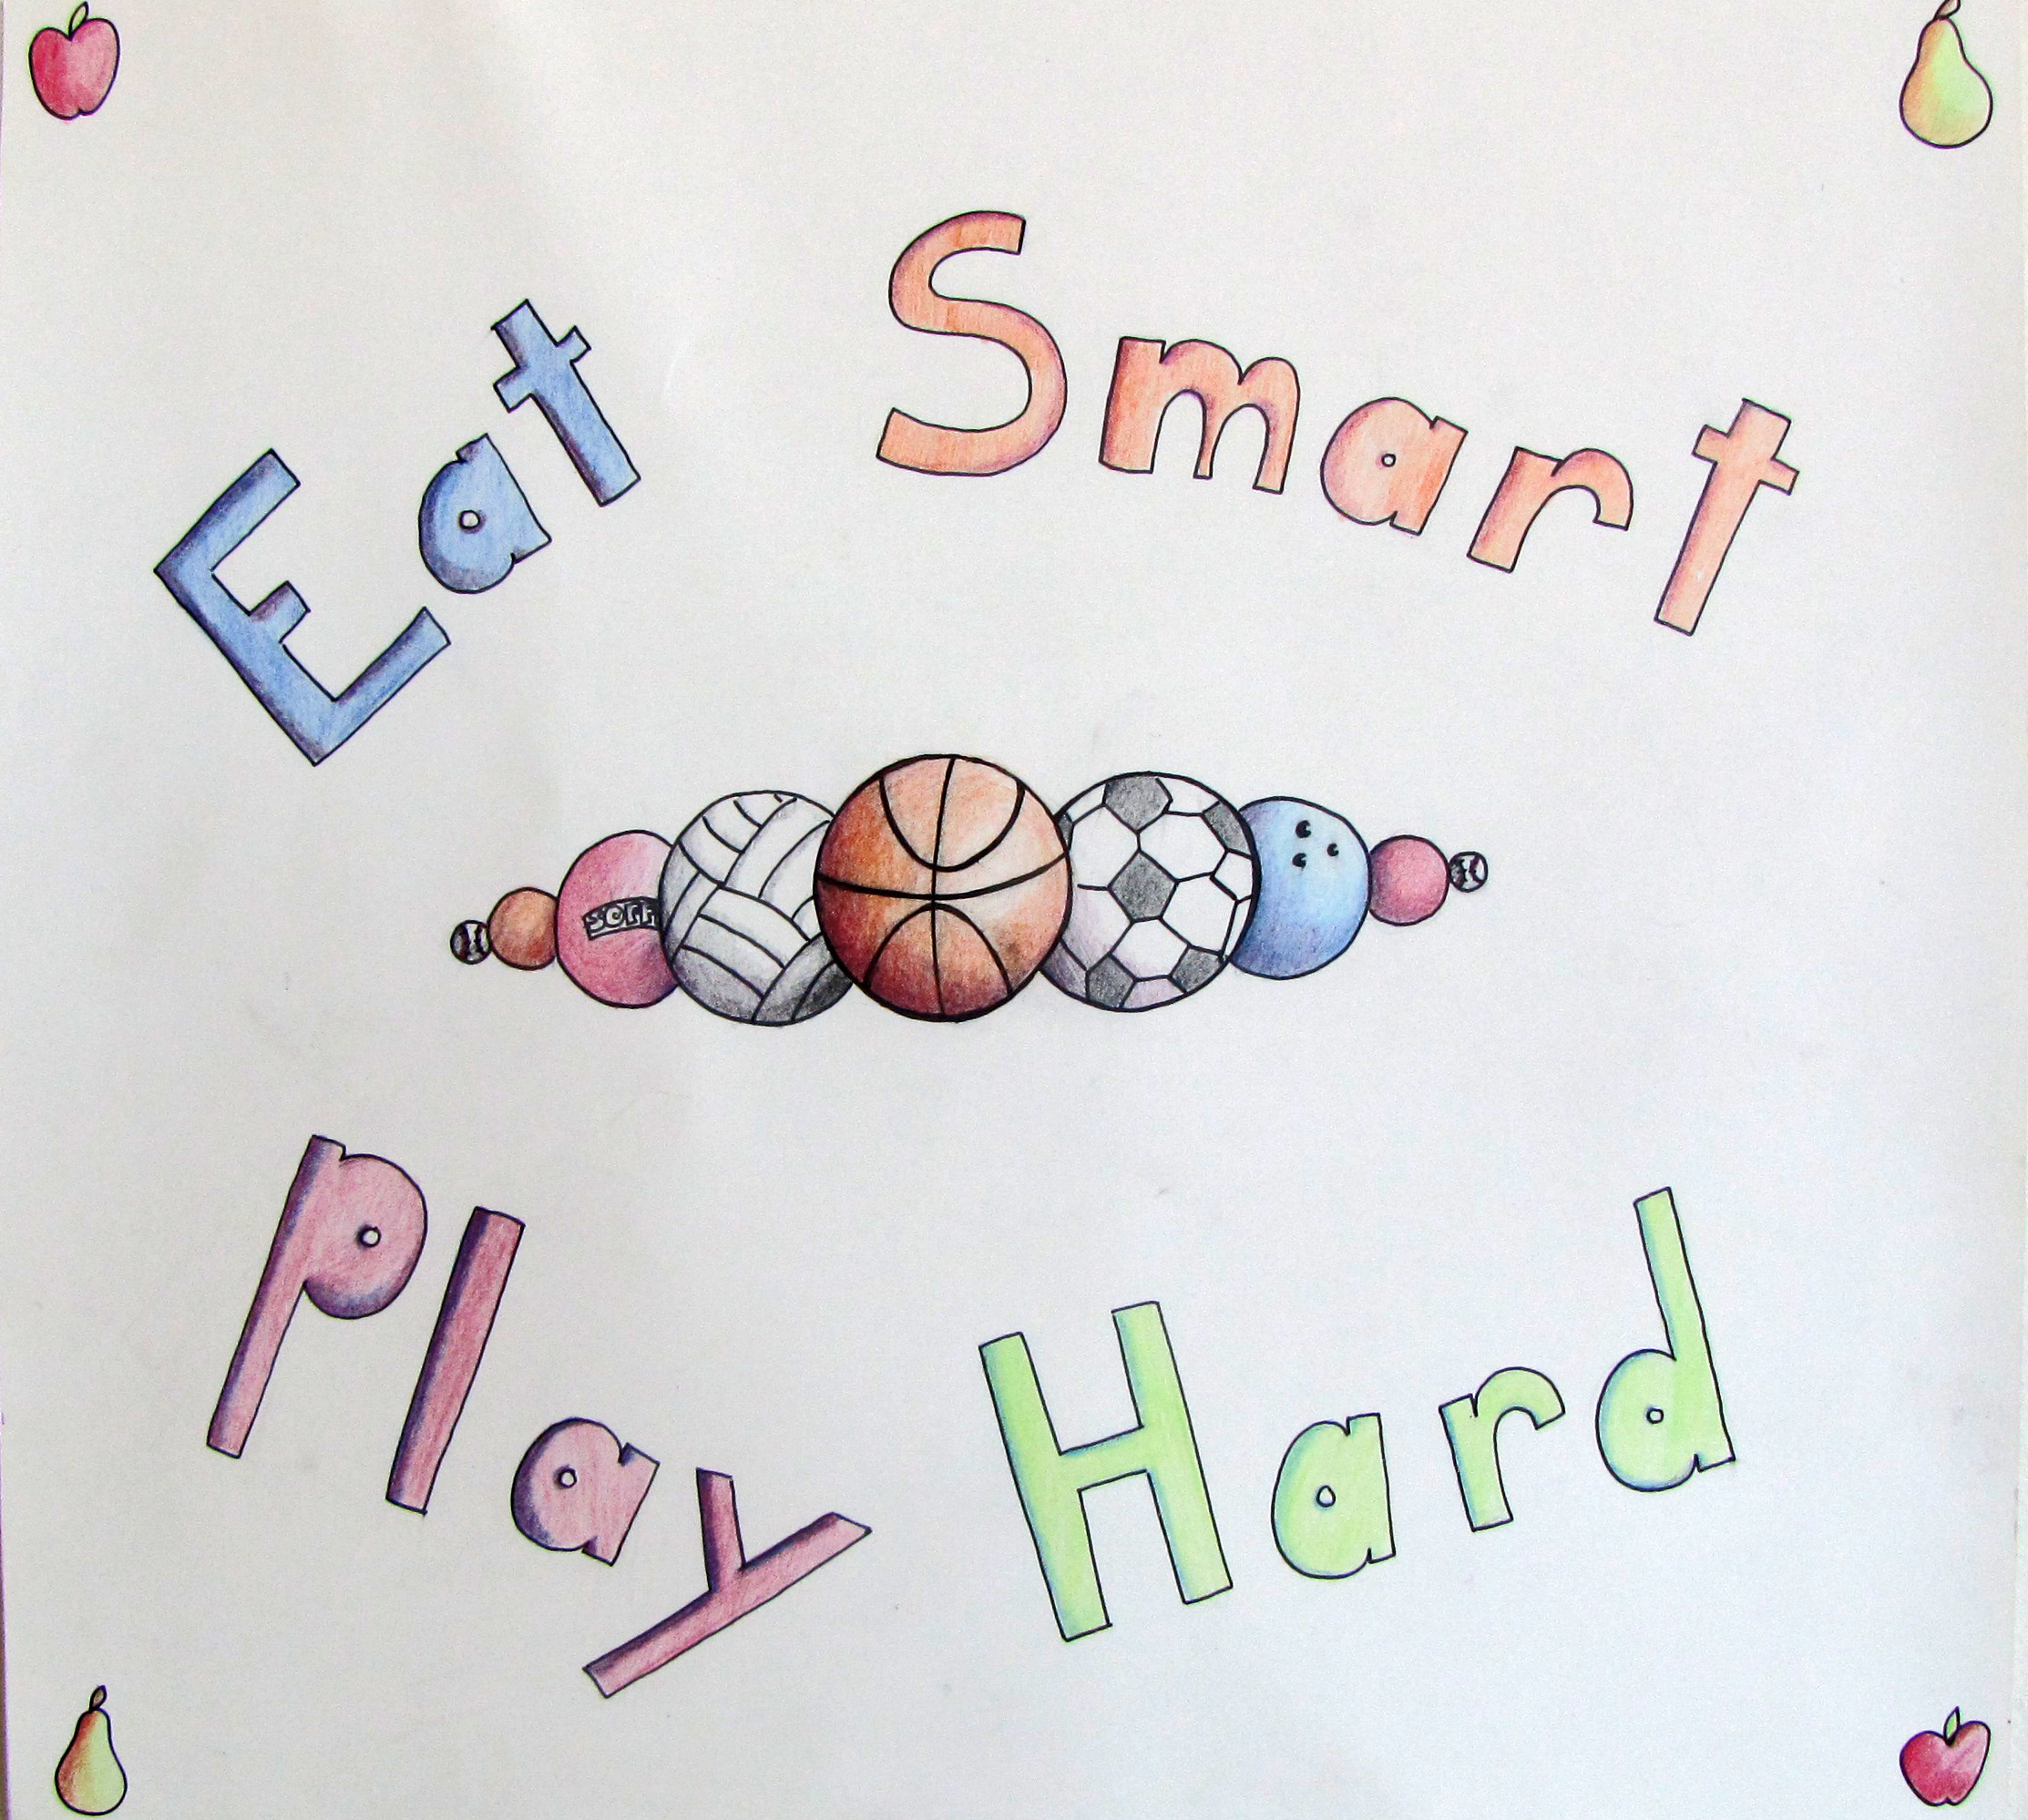 This poster by Megan Tichy, Tower City, receives first place in the teen division of the 2014 ""Eat Smart. Play Hard."" poster contest.